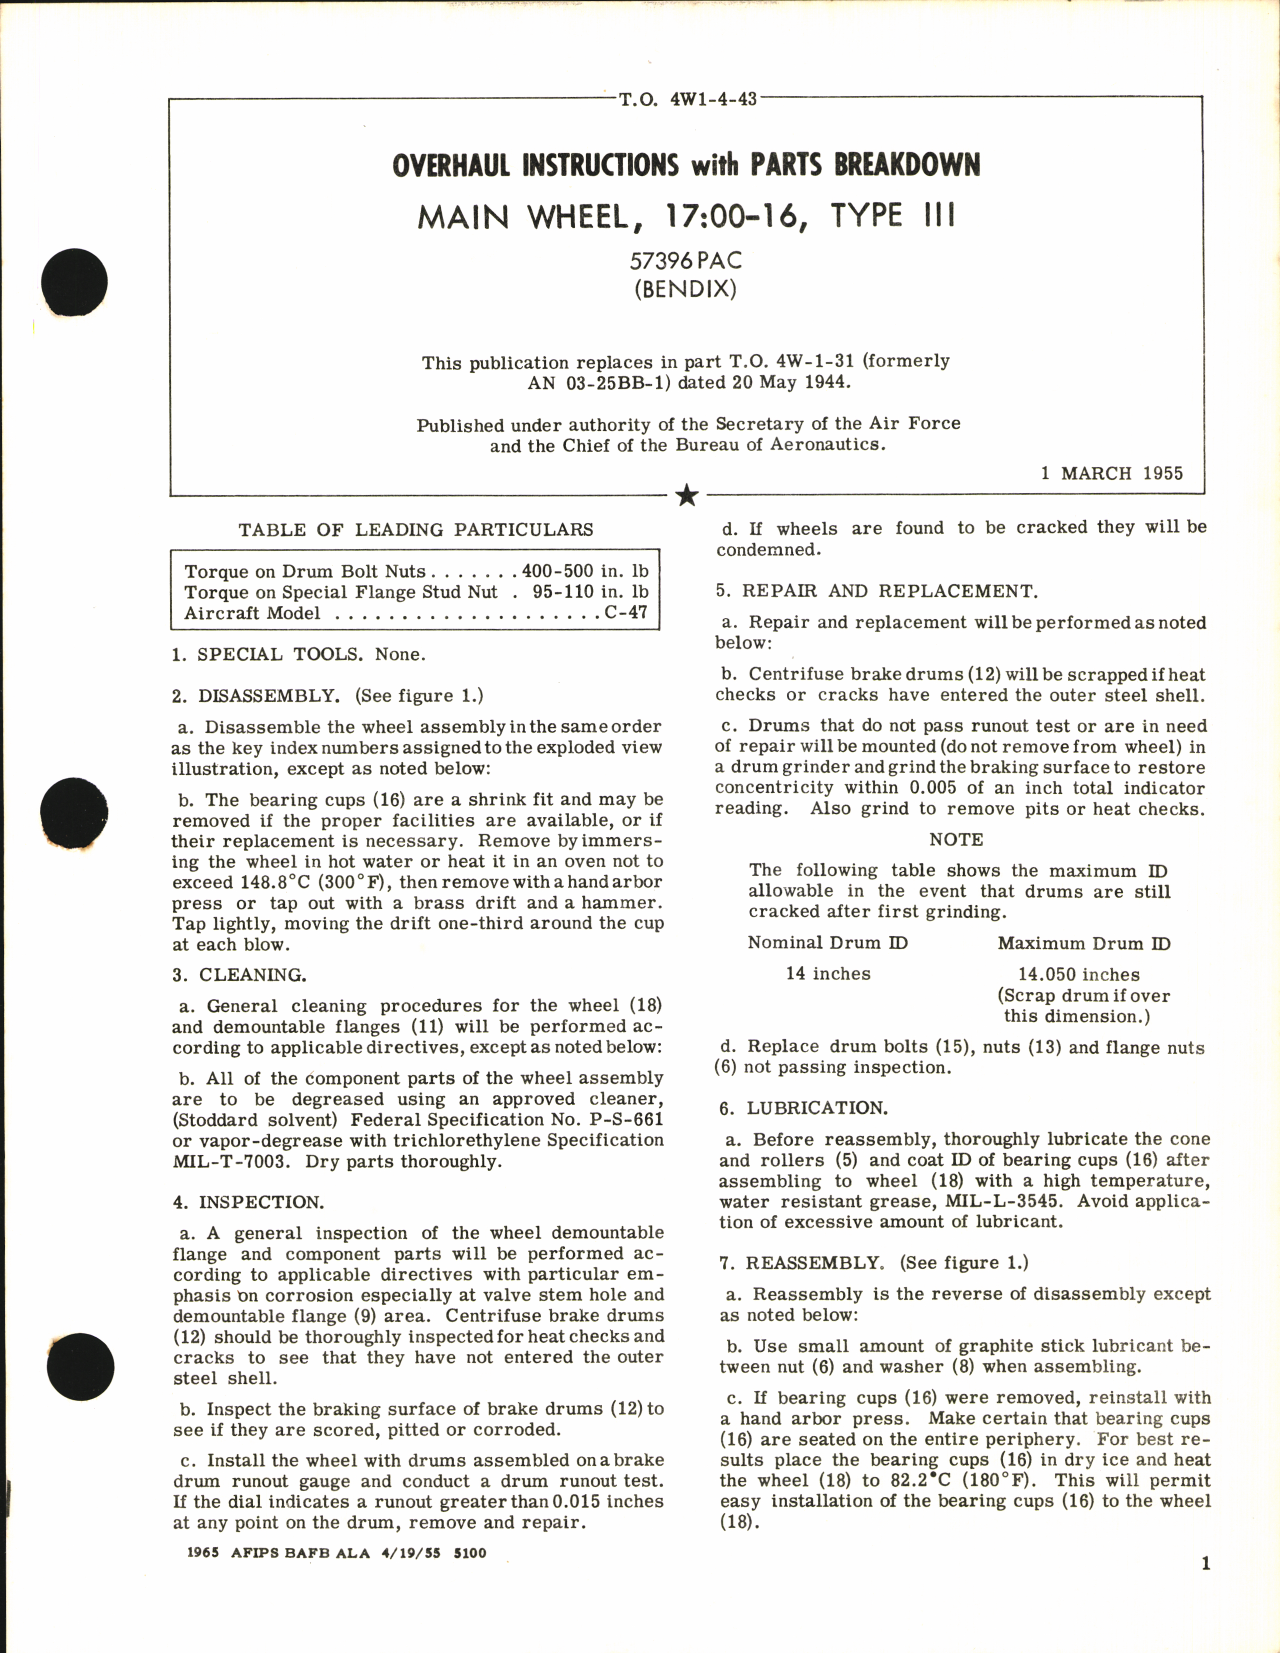 Sample page 1 from AirCorps Library document: Overhaul Instructions with Parts Breakdown for Main Wheel, 17:00-16, Type III